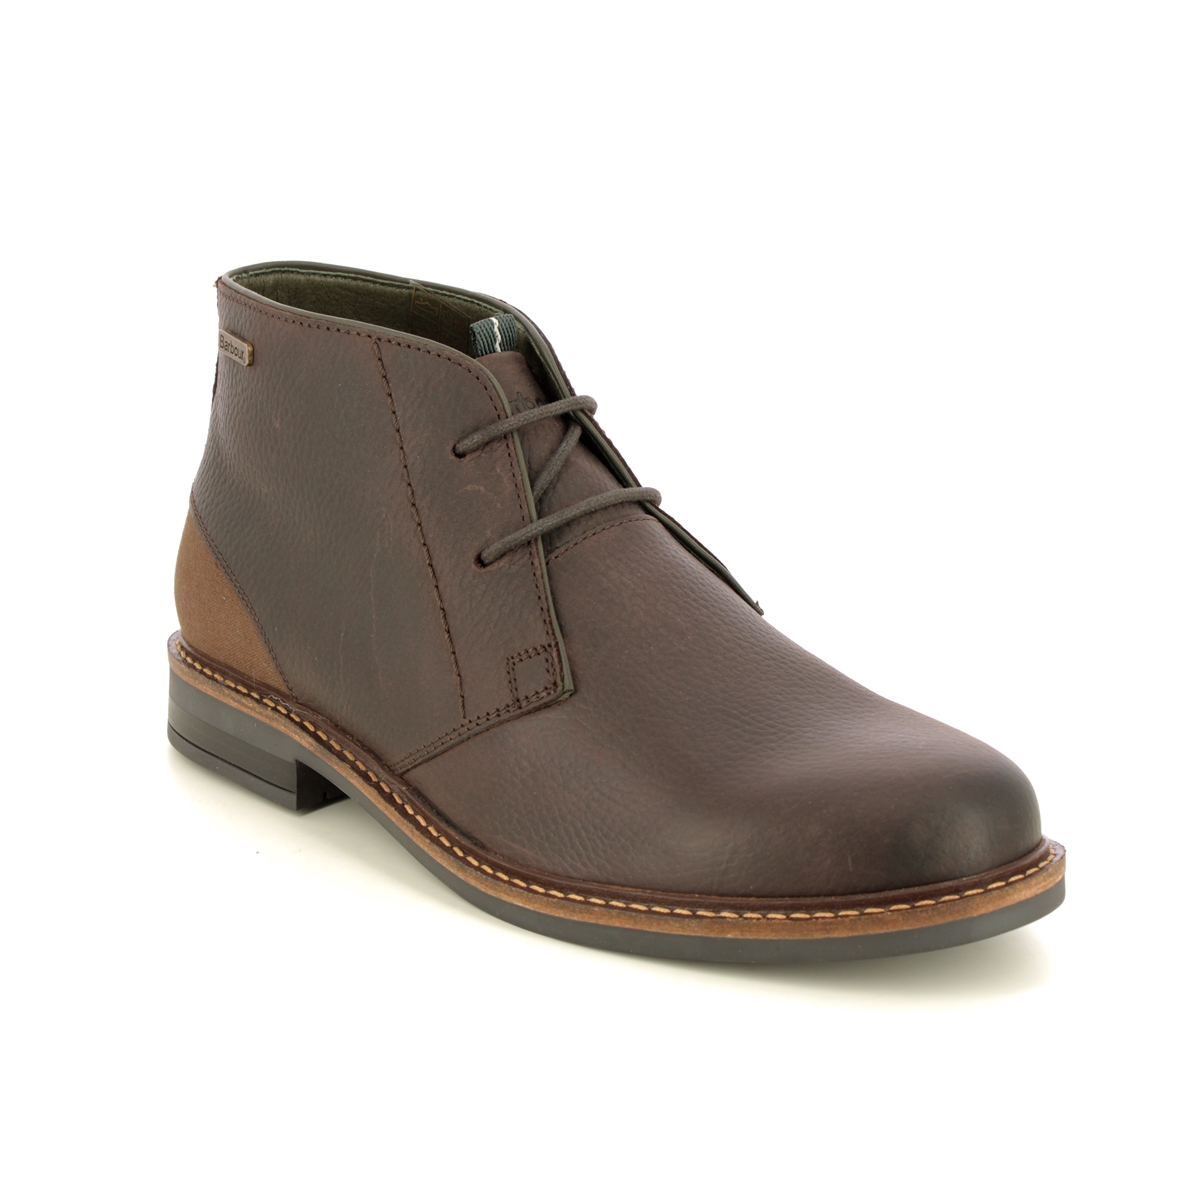 Barbour Redhead Brown leather Mens Chukka Boots MFO0138-BR77 in a Plain Leather in Size 12